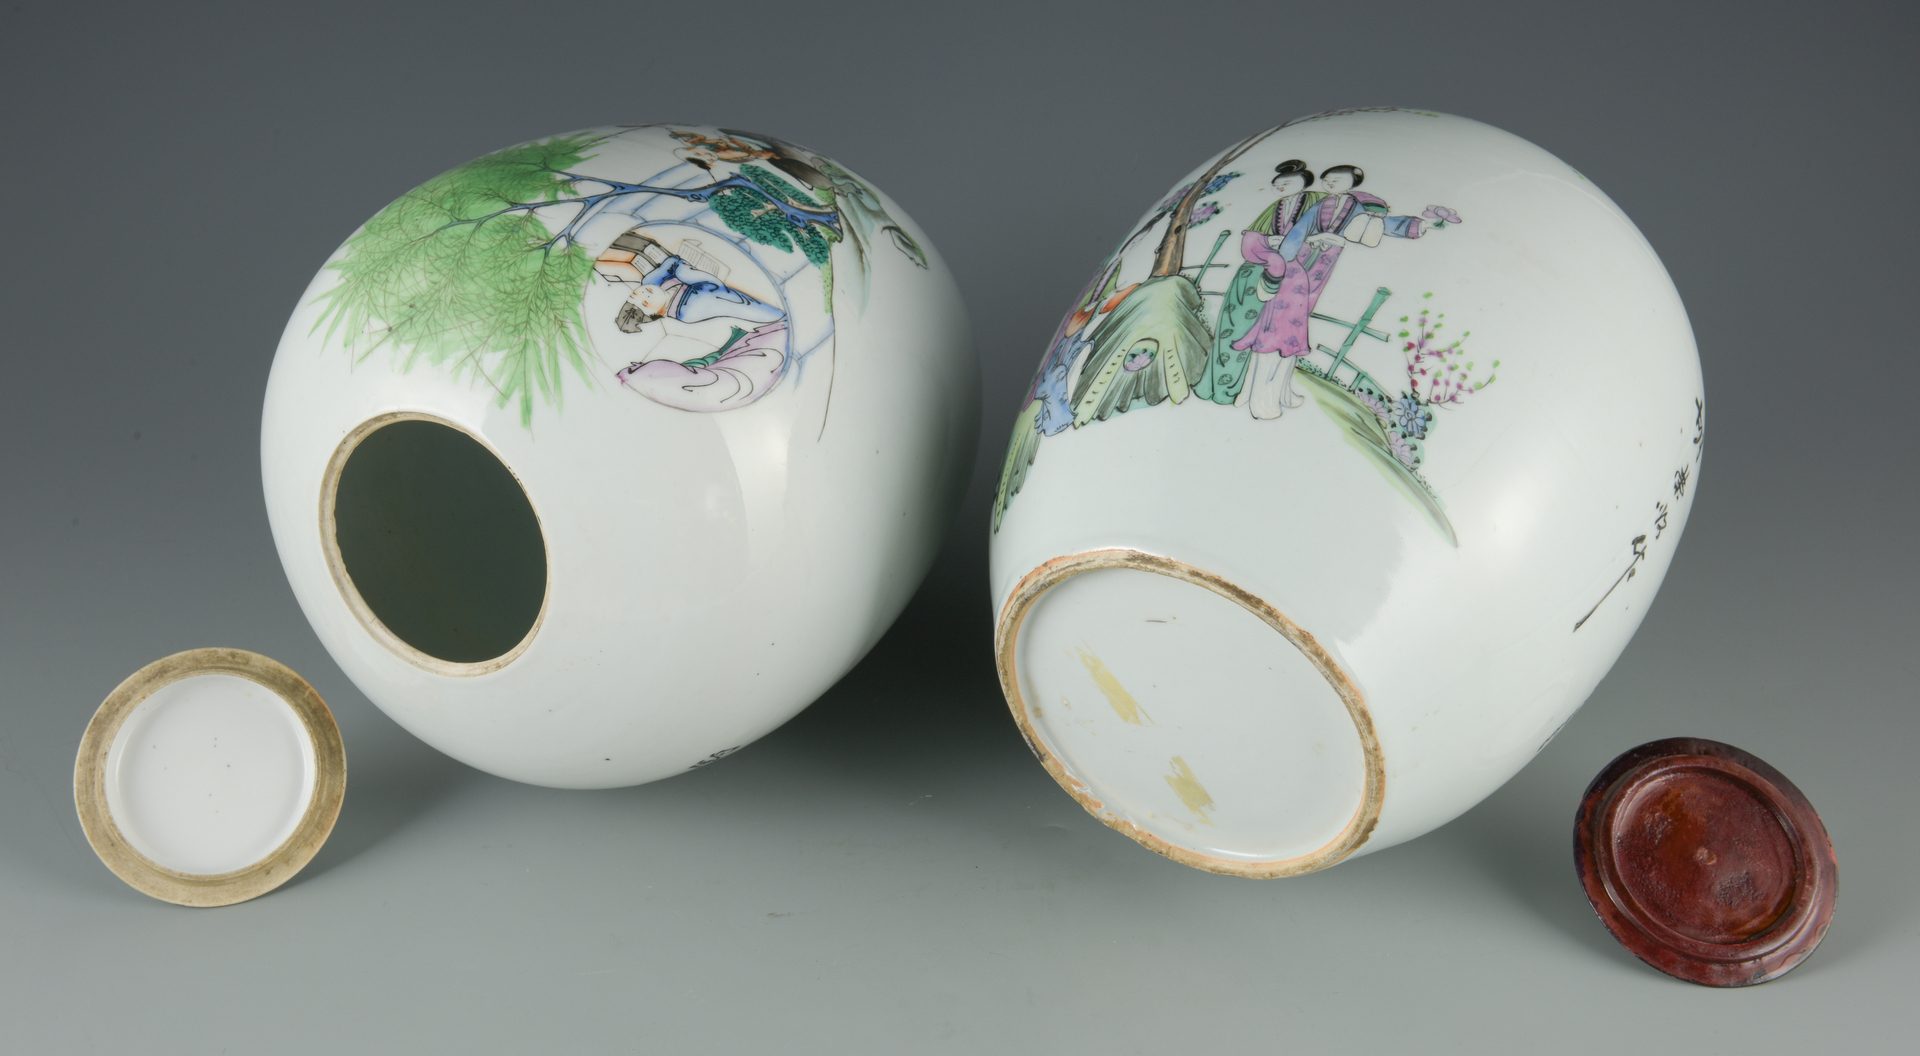 Lot 597: Two Chinese Famille Rose Ginger Jars